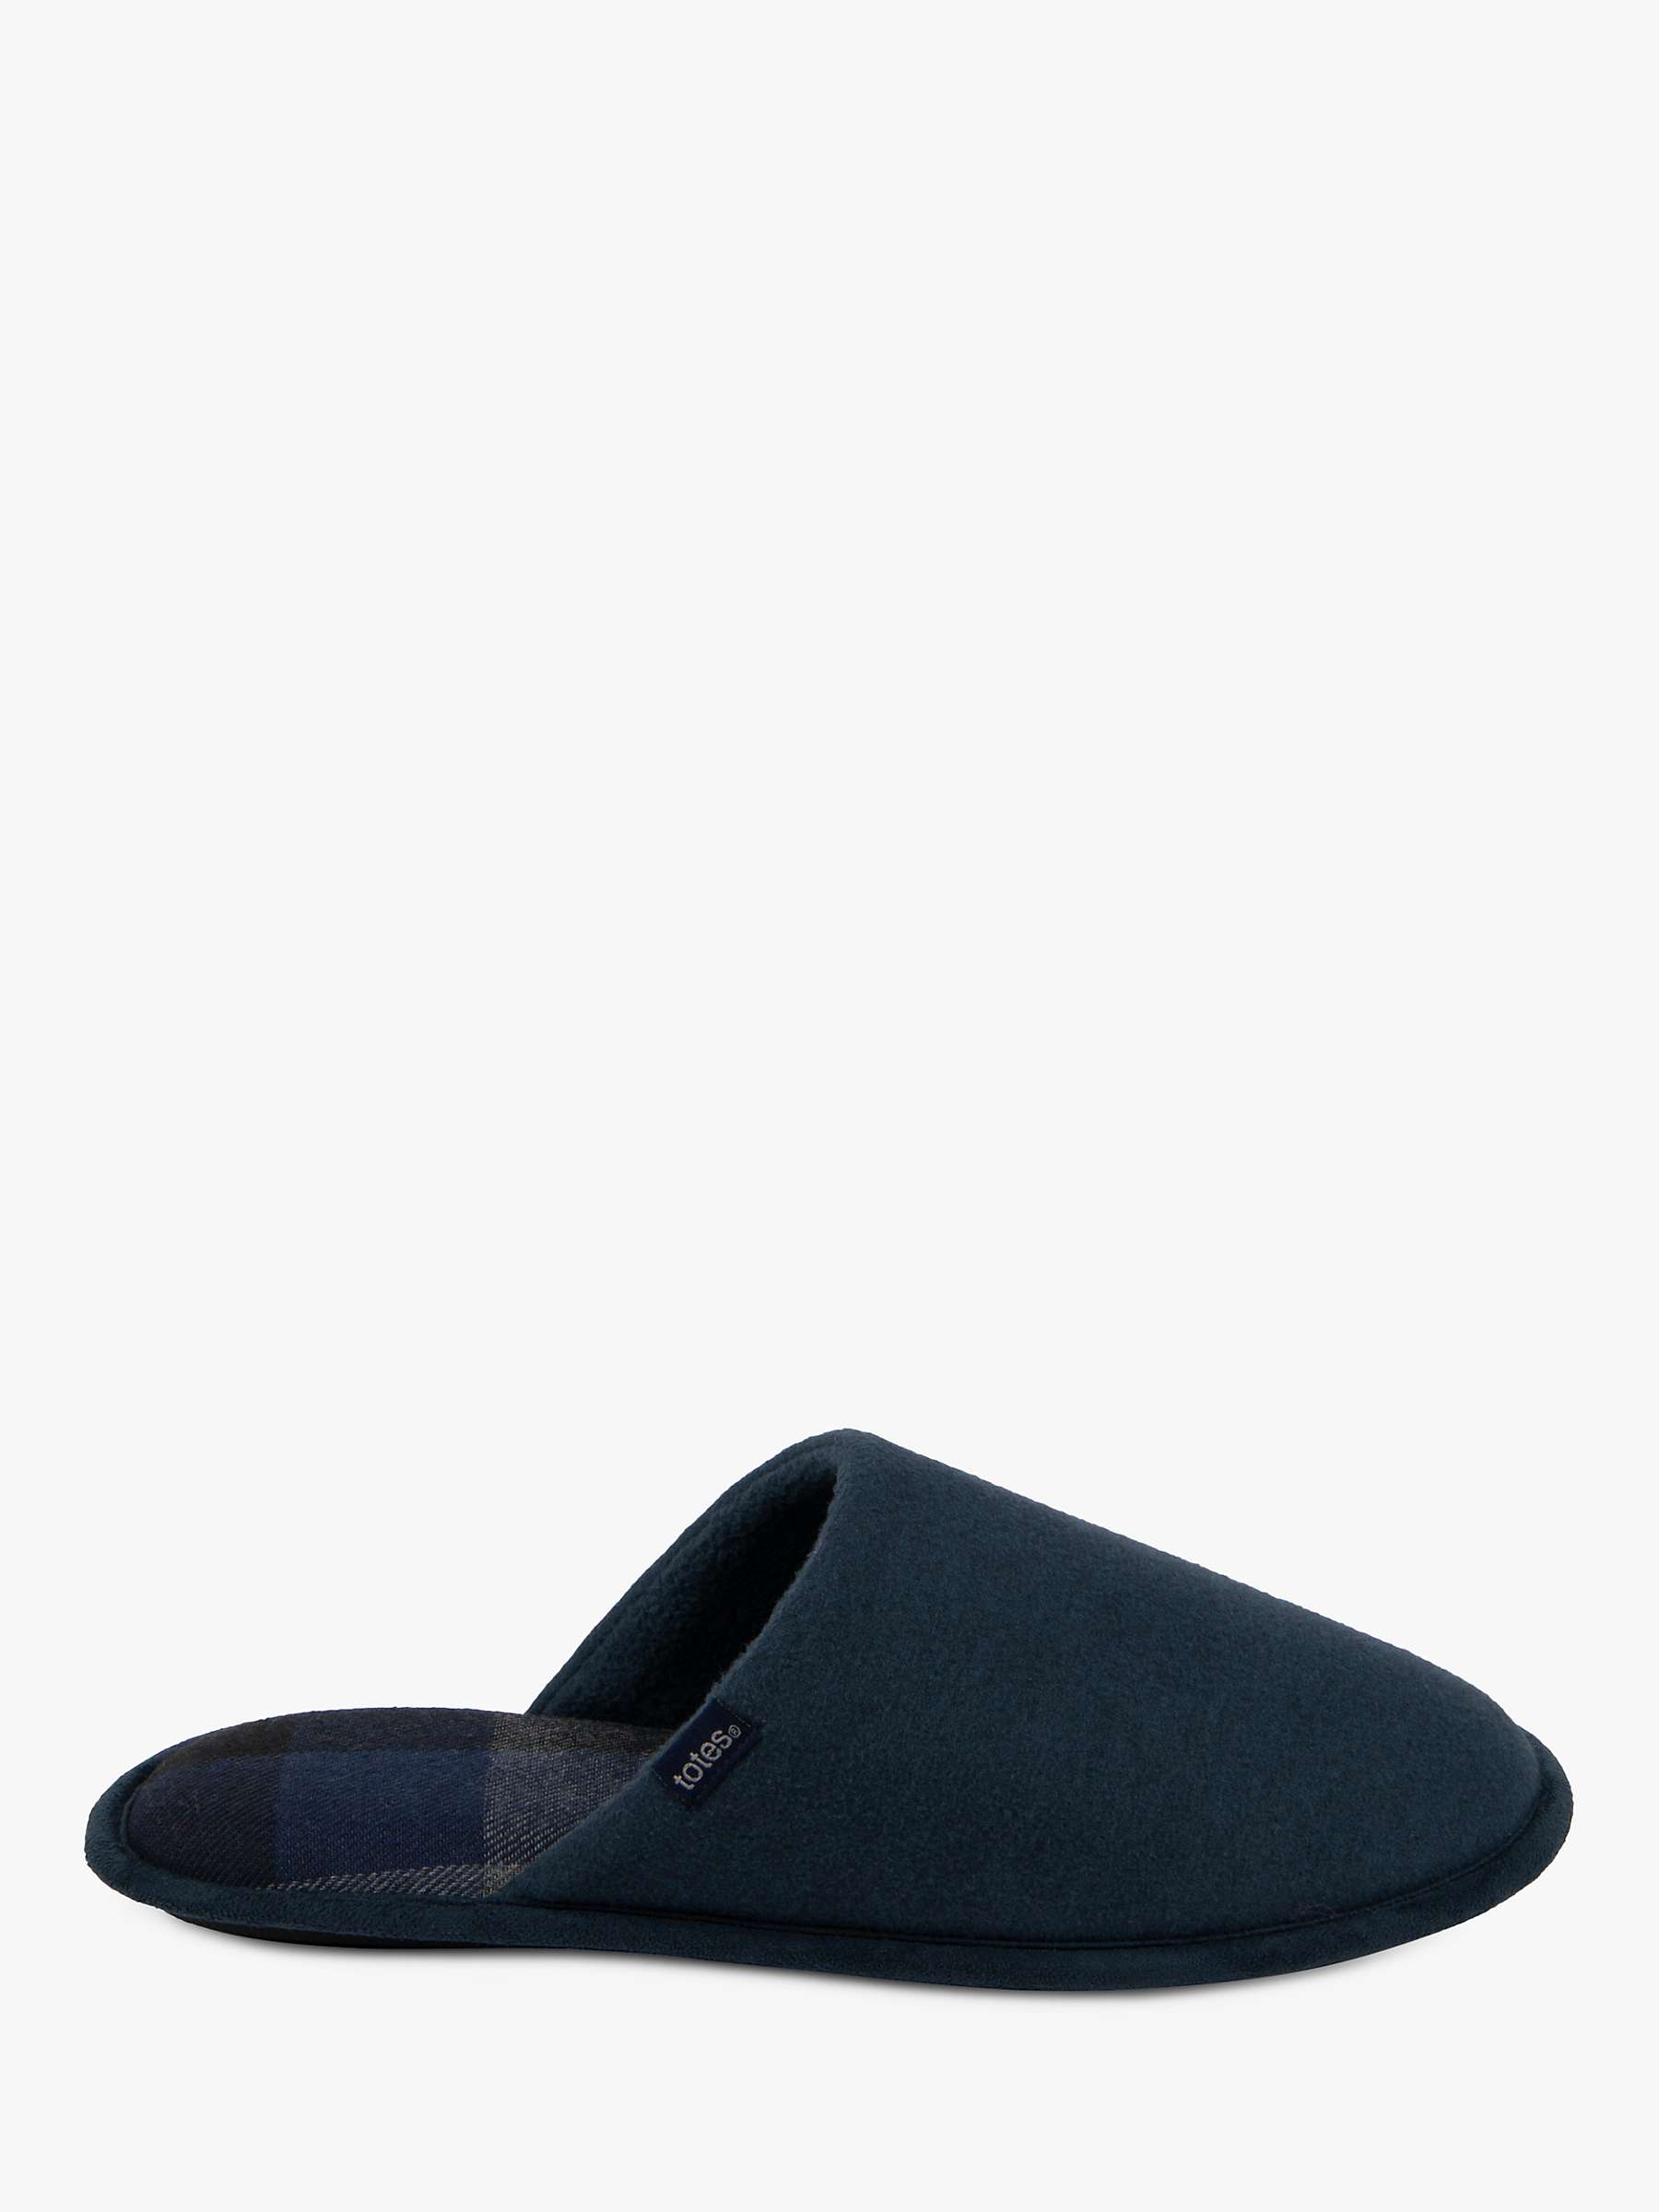 Buy totes Check Lining Mule Slippers, Navy Online at johnlewis.com